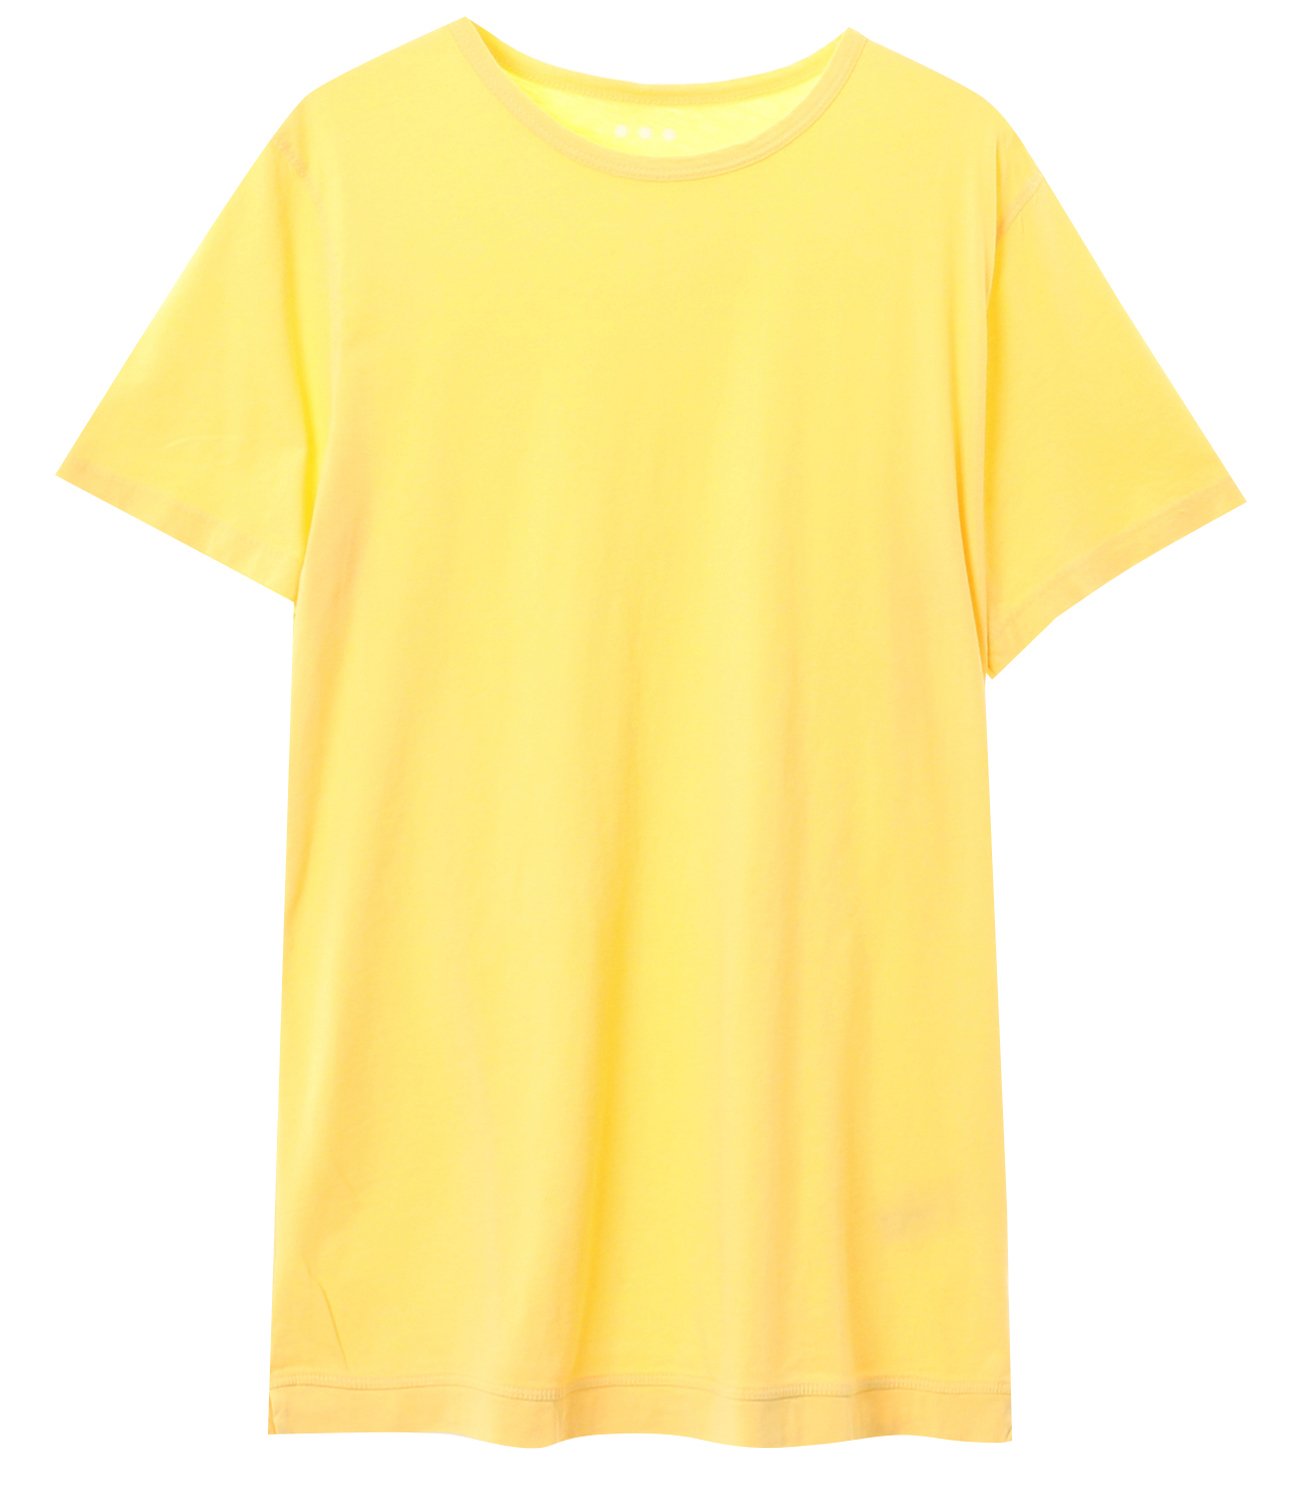 James (new basic line) sanded jersey 詳細画像 yellow vibe 2